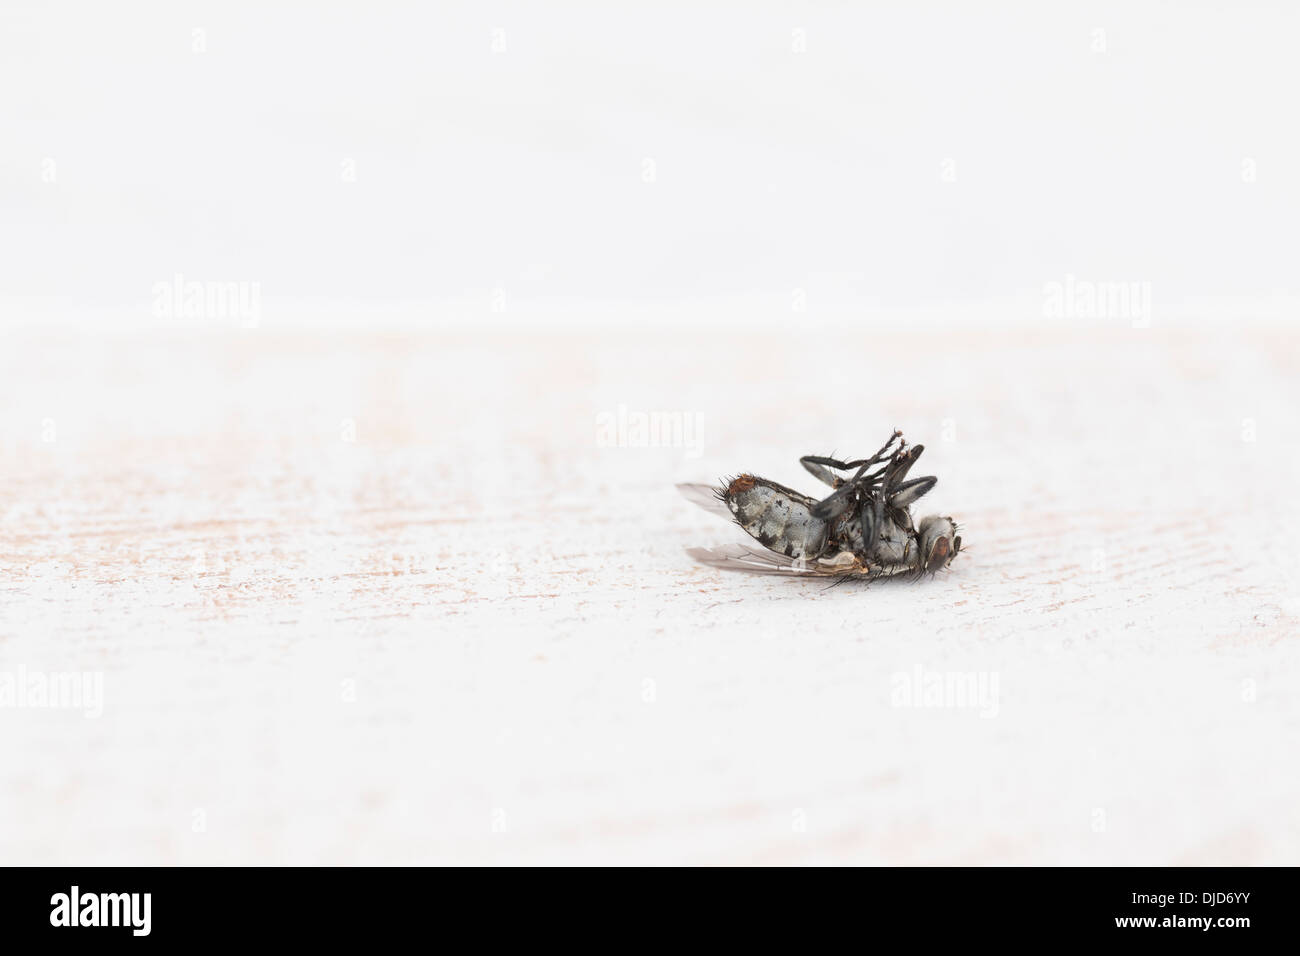 Dead housefly (Musca domestica) on white wooden table, studio shot Stock Photo